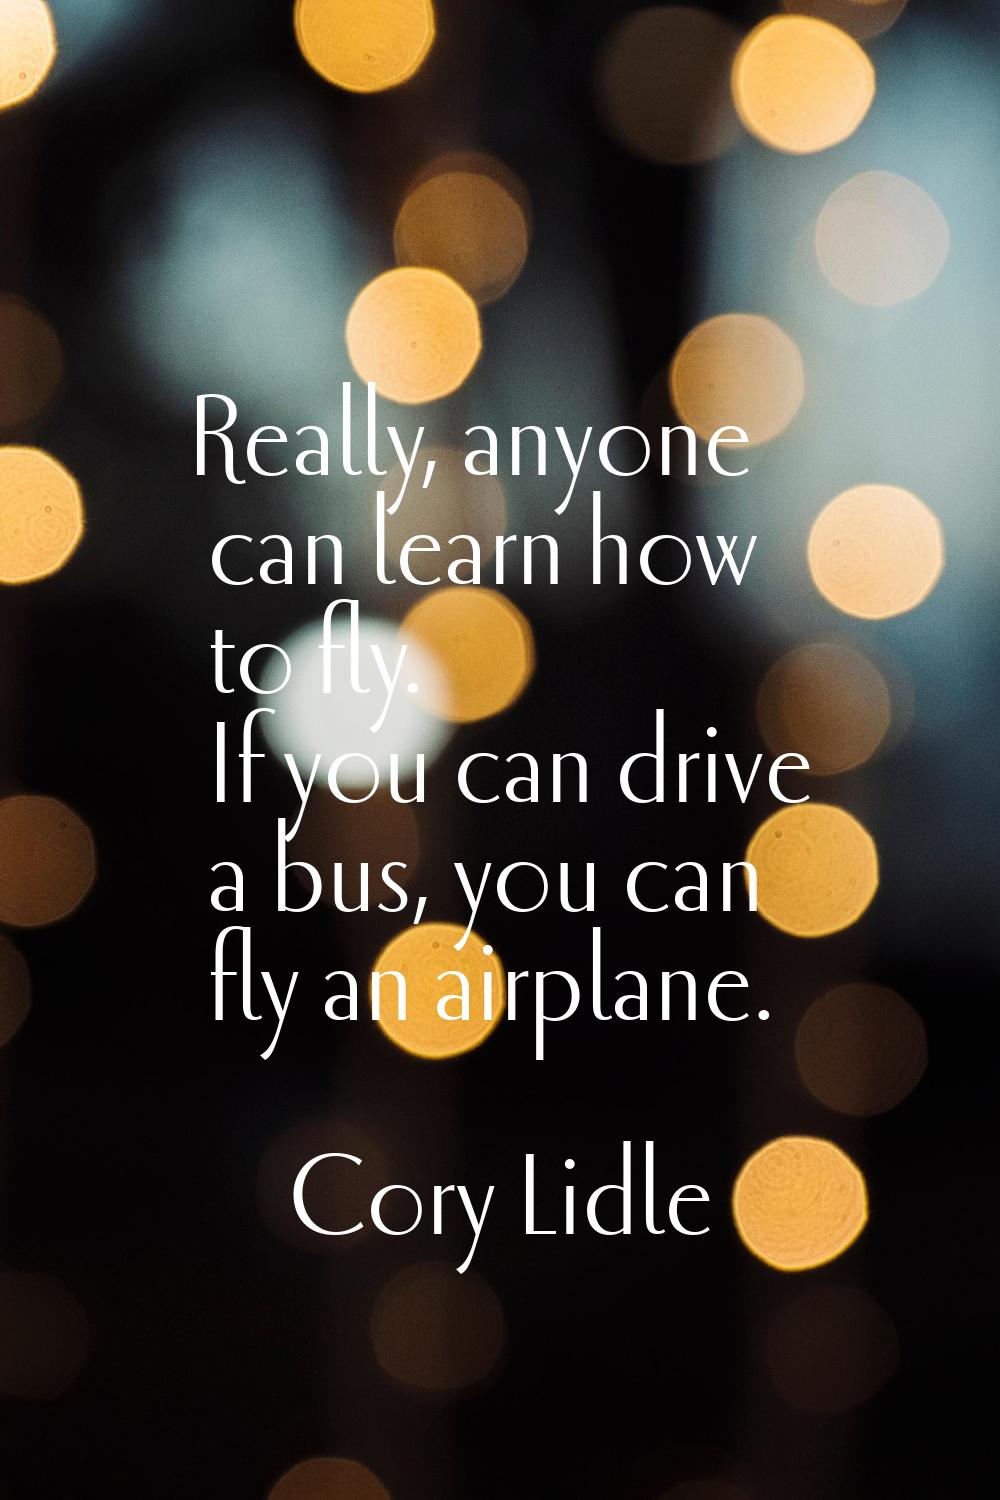 Really, anyone can learn how to fly. If you can drive a bus, you can fly an airplane.